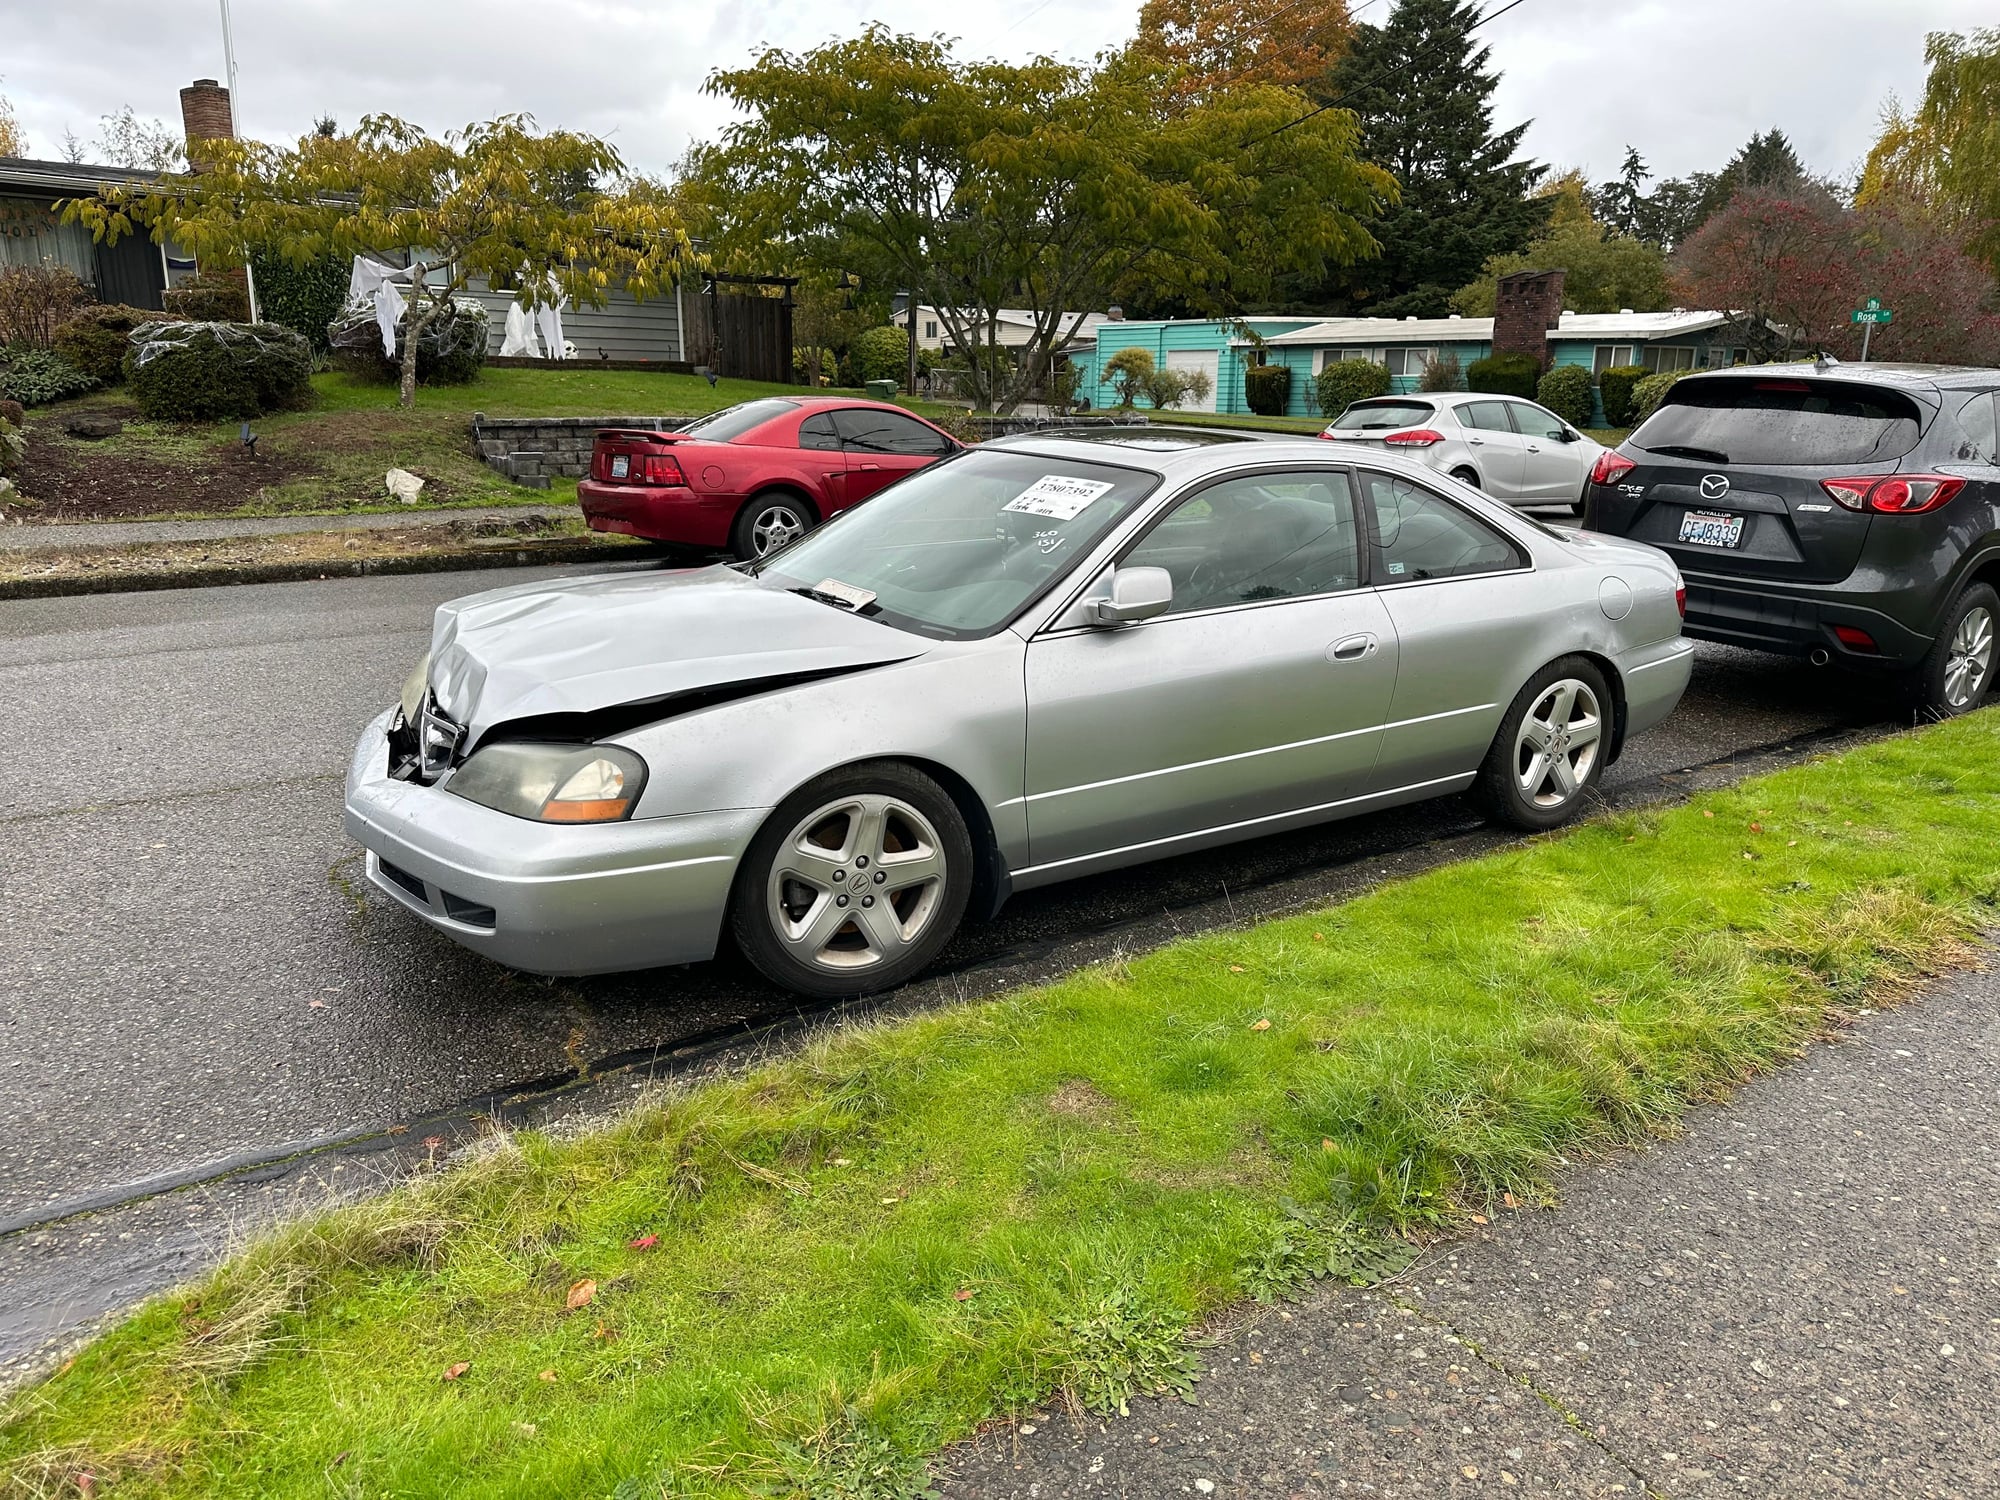 2003 Acura CL - FS: Totaled CLS6 with front end damage - Used - VIN 19UYA41643A006877 - 170,000 Miles - 6 cyl - 2WD - Manual - Coupe - Silver - Tacoma, WA 98406, United States